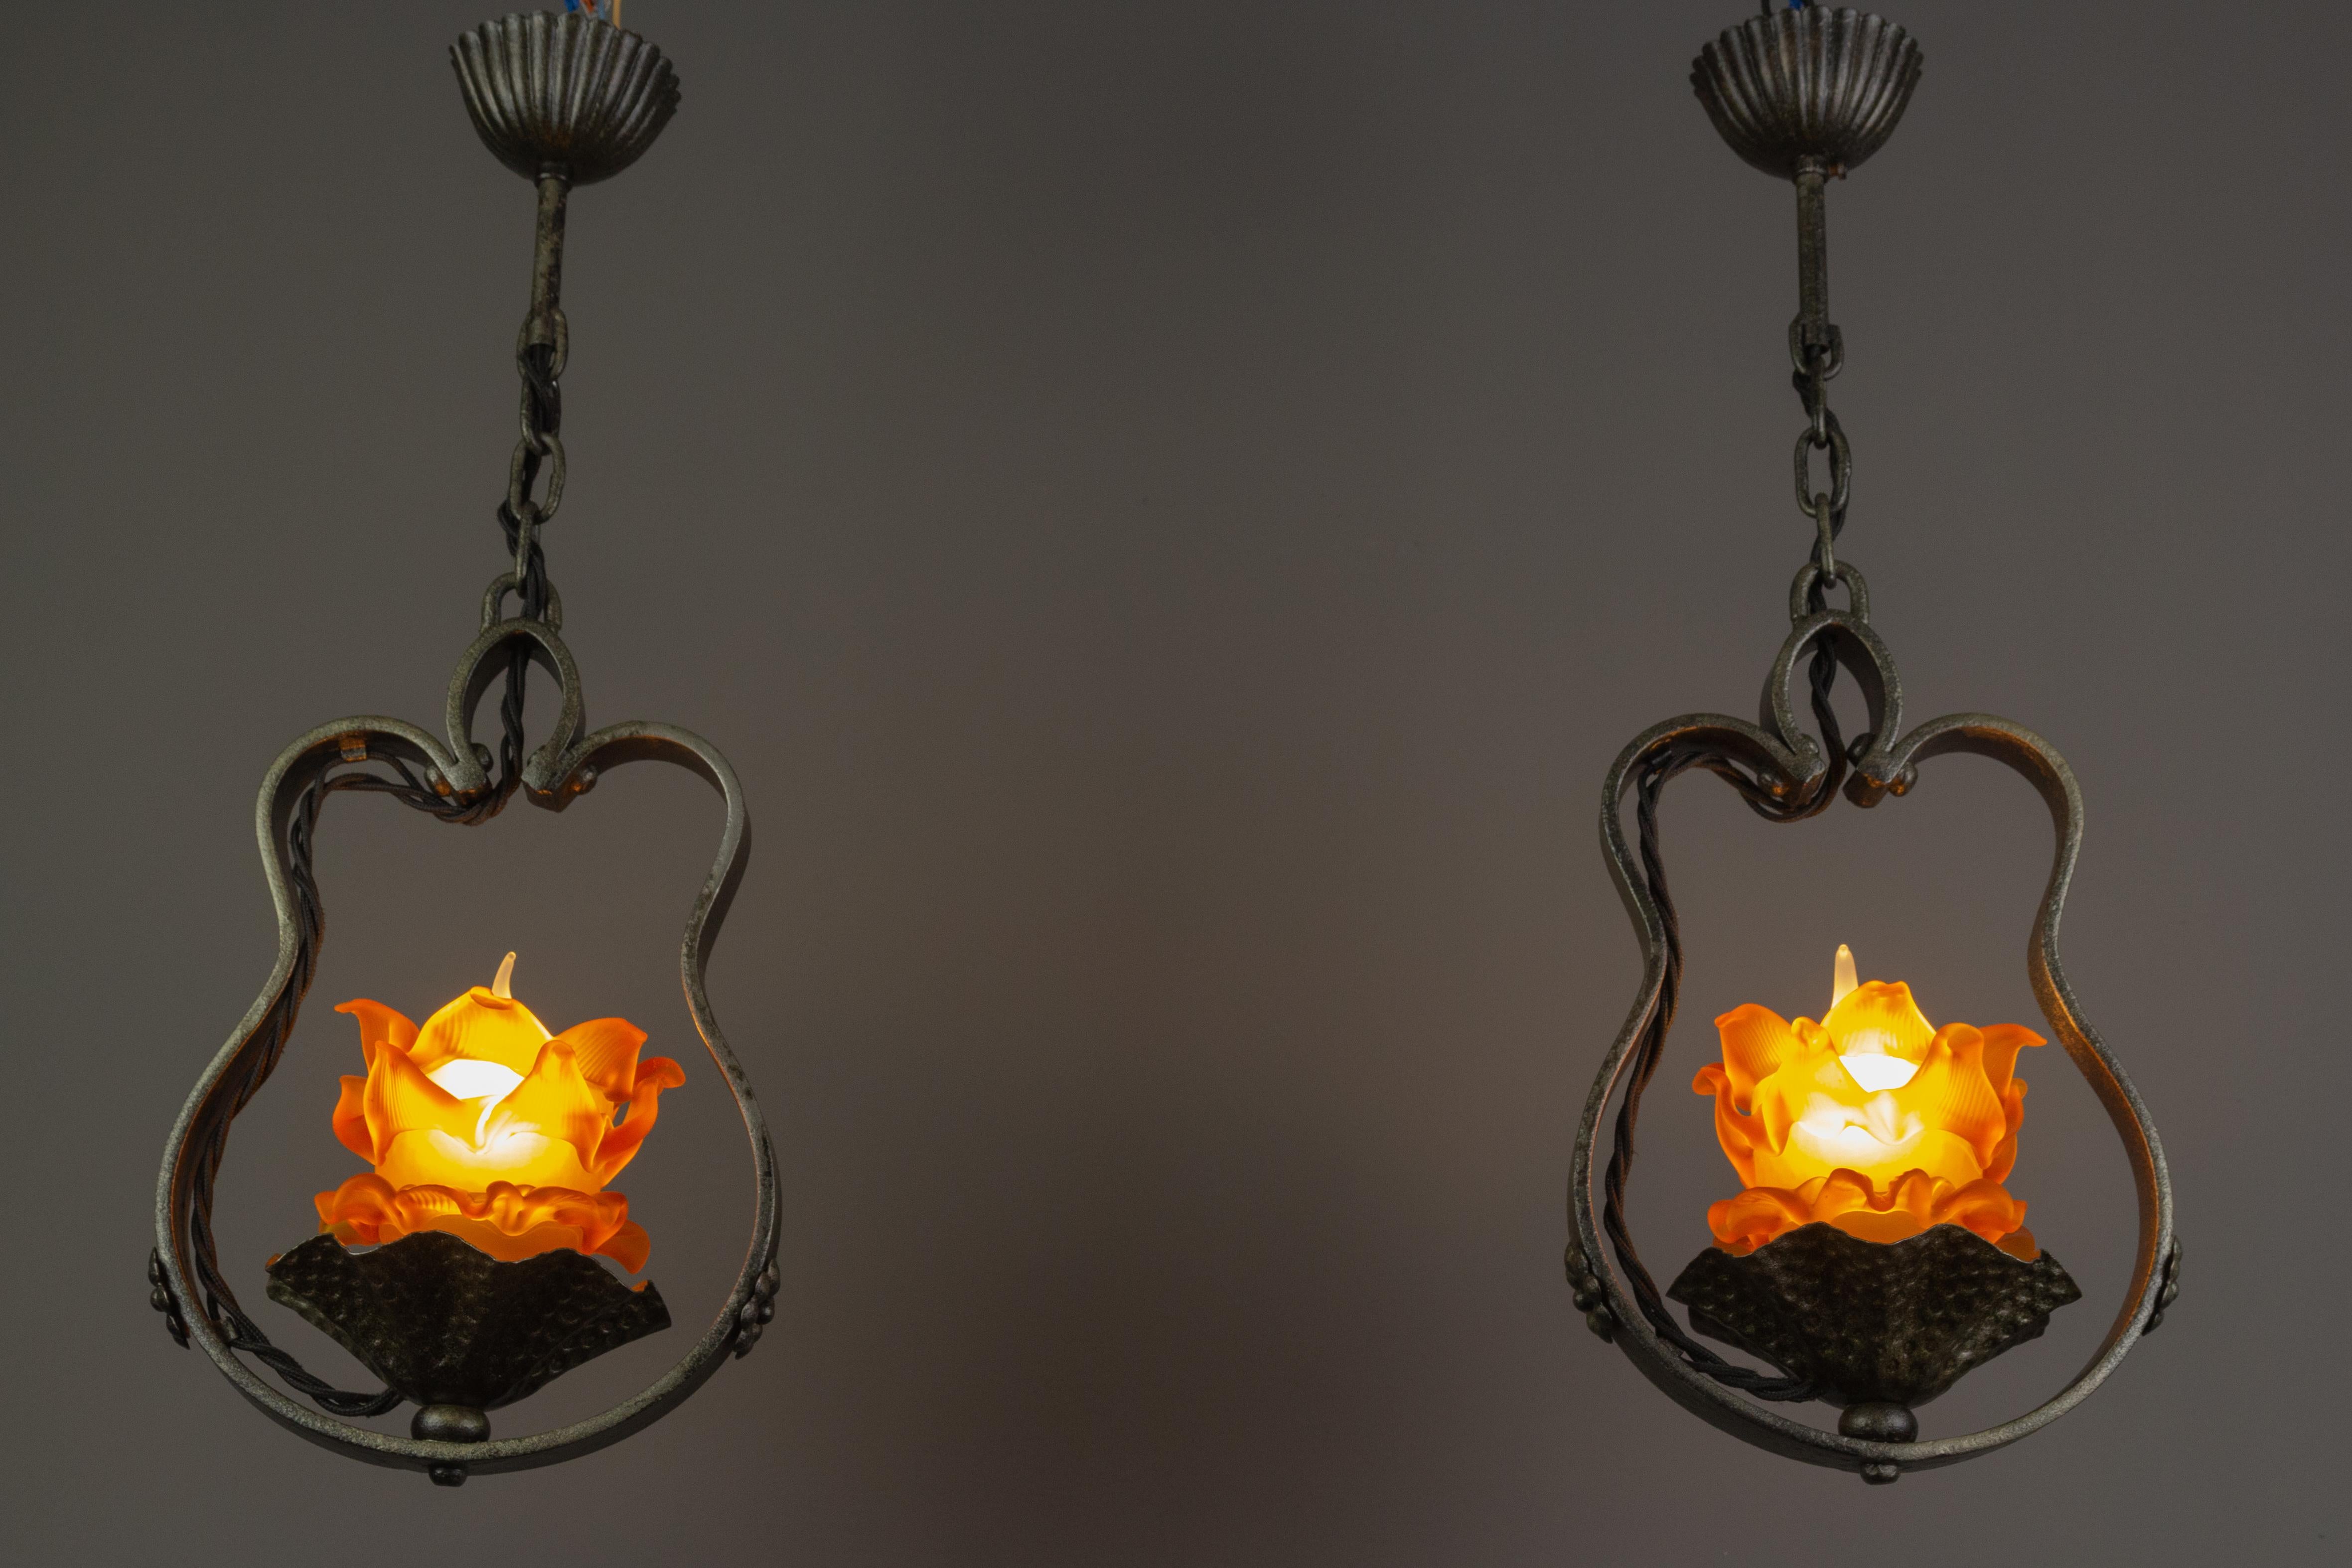 A nice decorative pair of French wrought iron pendant light fixtures in the shape of a water lily. Each light fixture has one beautiful flower-shaped orange or amber color glass paste lampshade and one socket for an E14 size light bulb.
Dimensions